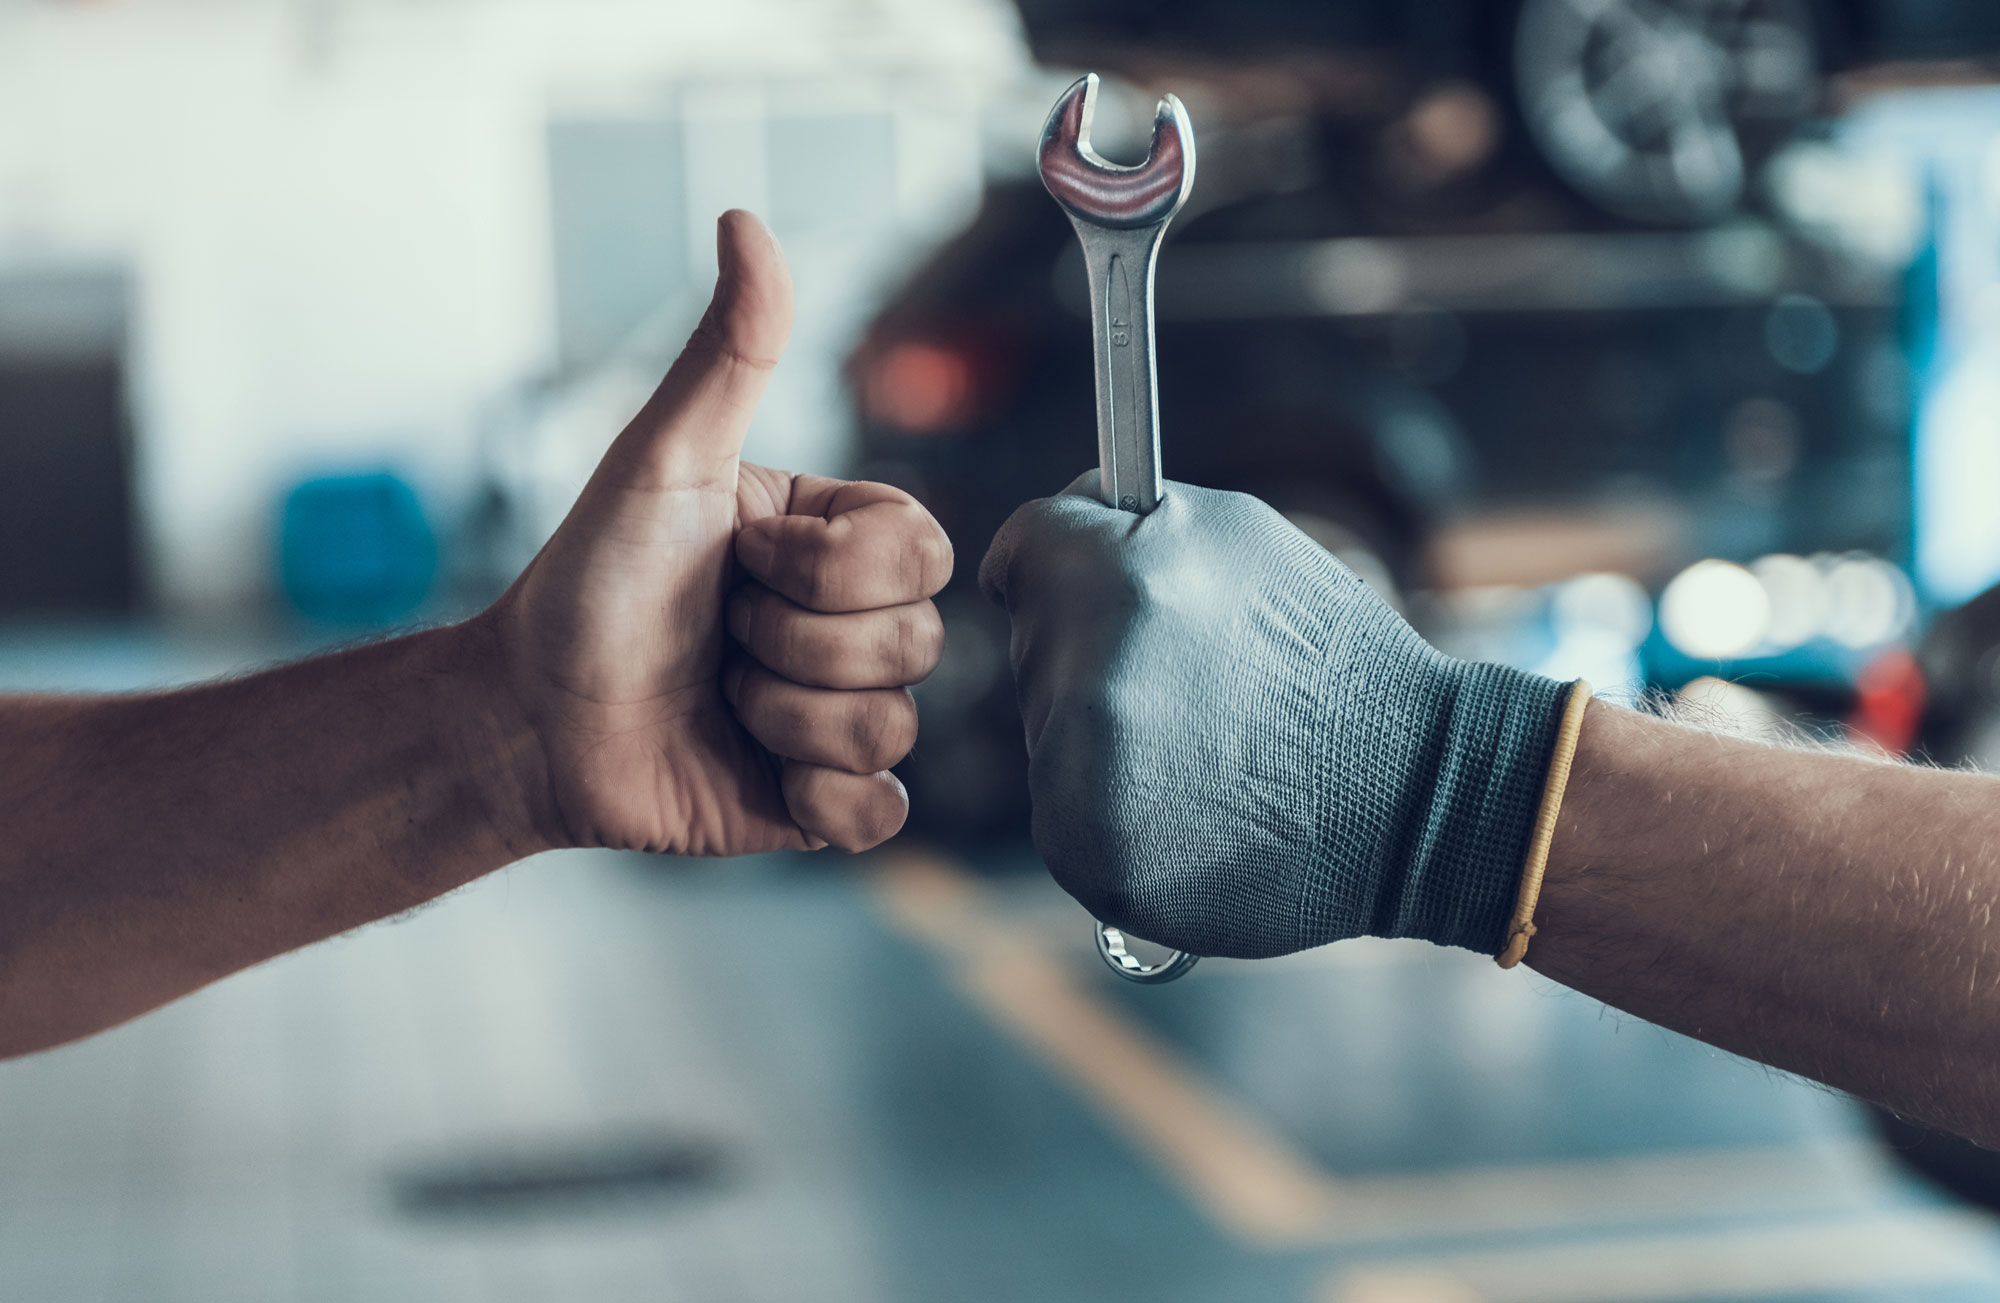 Two hands, one giving a thumbs up, the other holding a wrench, symbolizing approval and expertise